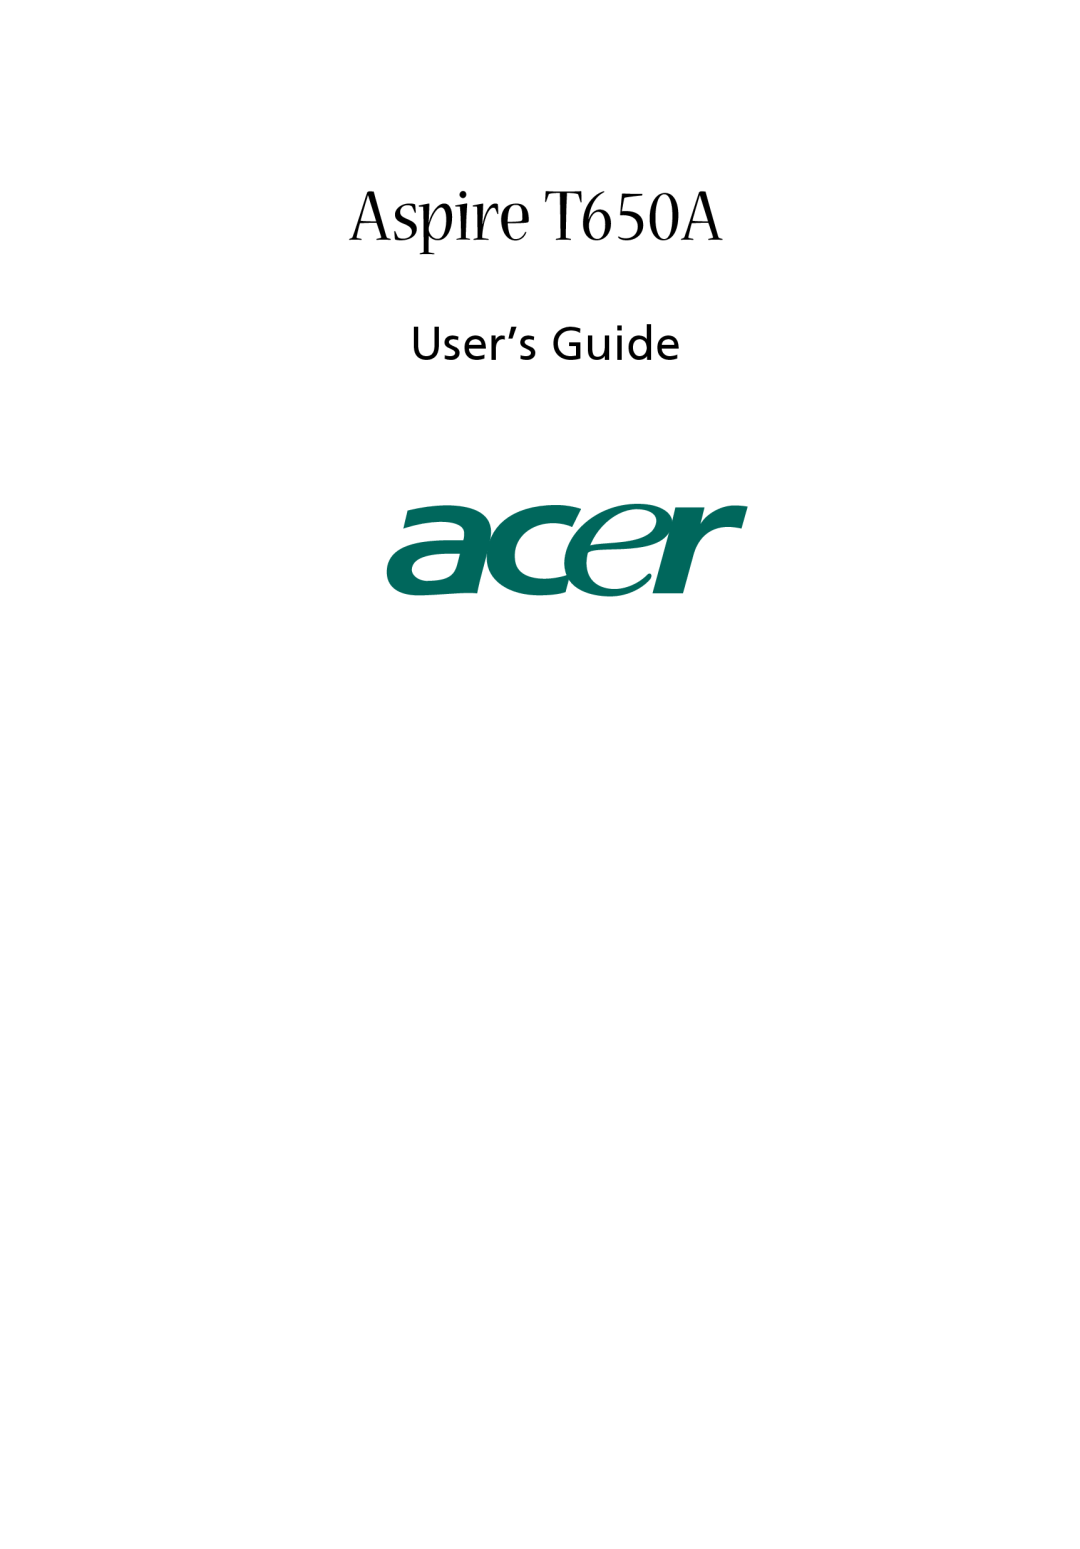 Acer manual User’s Guide, Aspire T650A 